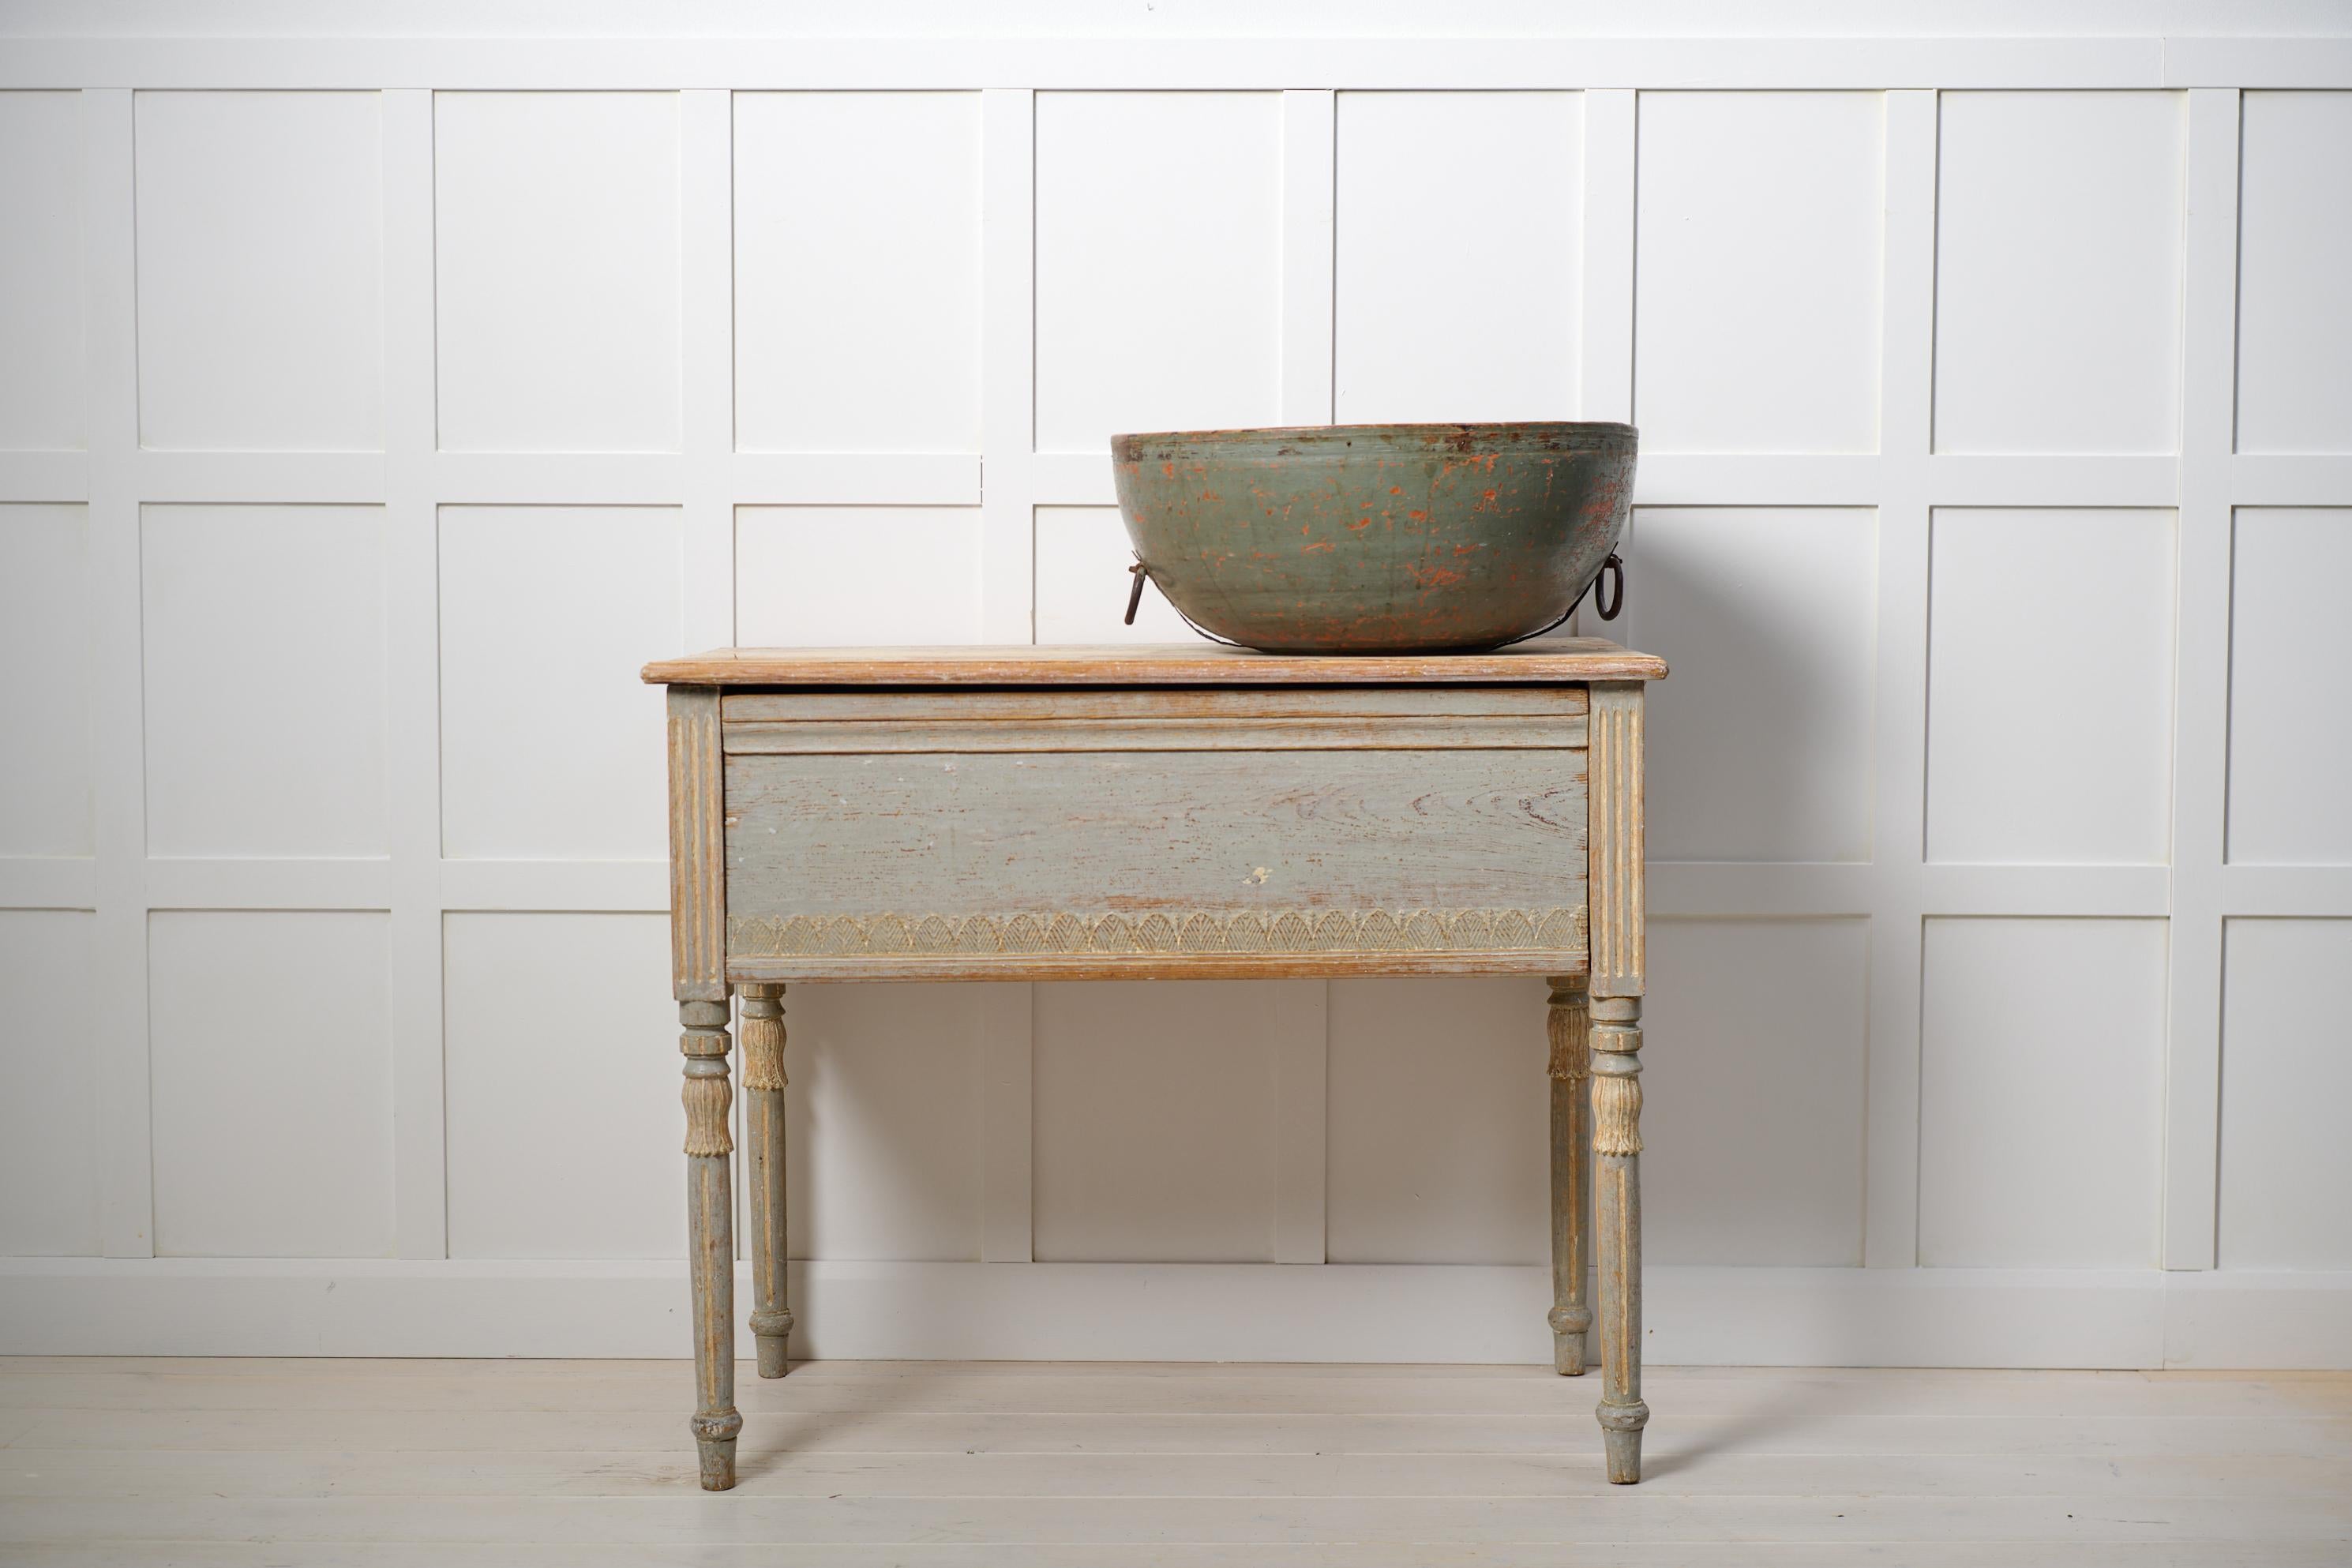 Antique country console table in gustavian style from northern Sweden. The table is made around 1820 and has original light paint with genuine patina and distress. Made by hand in solid pine. The table has round legs with carved wooden decor and the